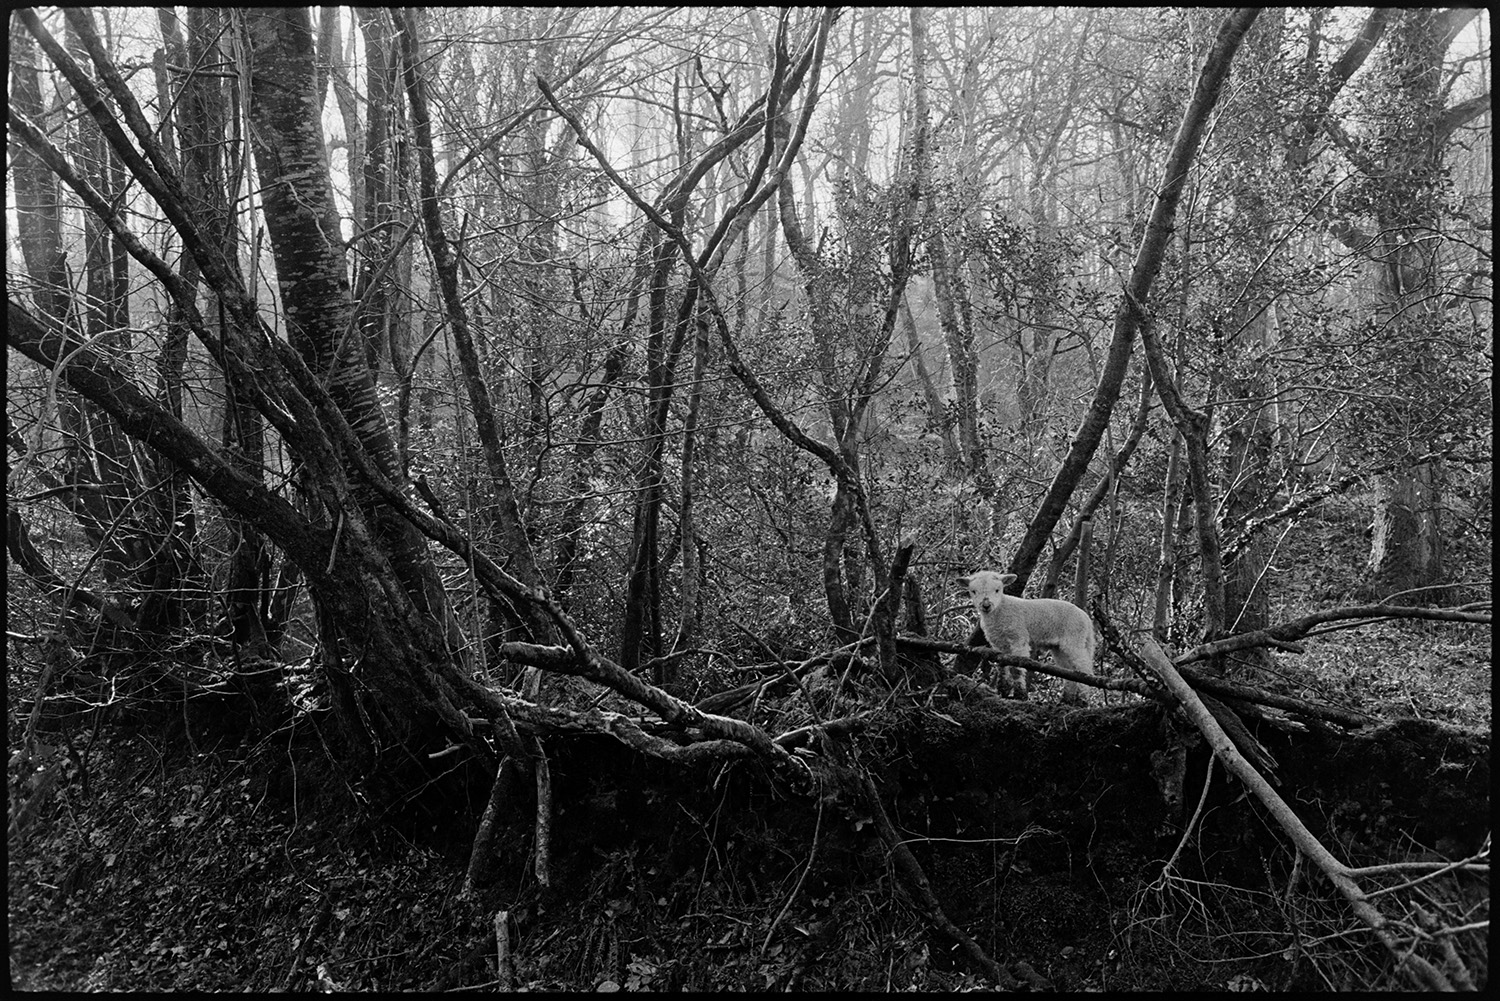 Lost sheep in wood. 
[A lamb amongst tree branches in Dolton Wood.]